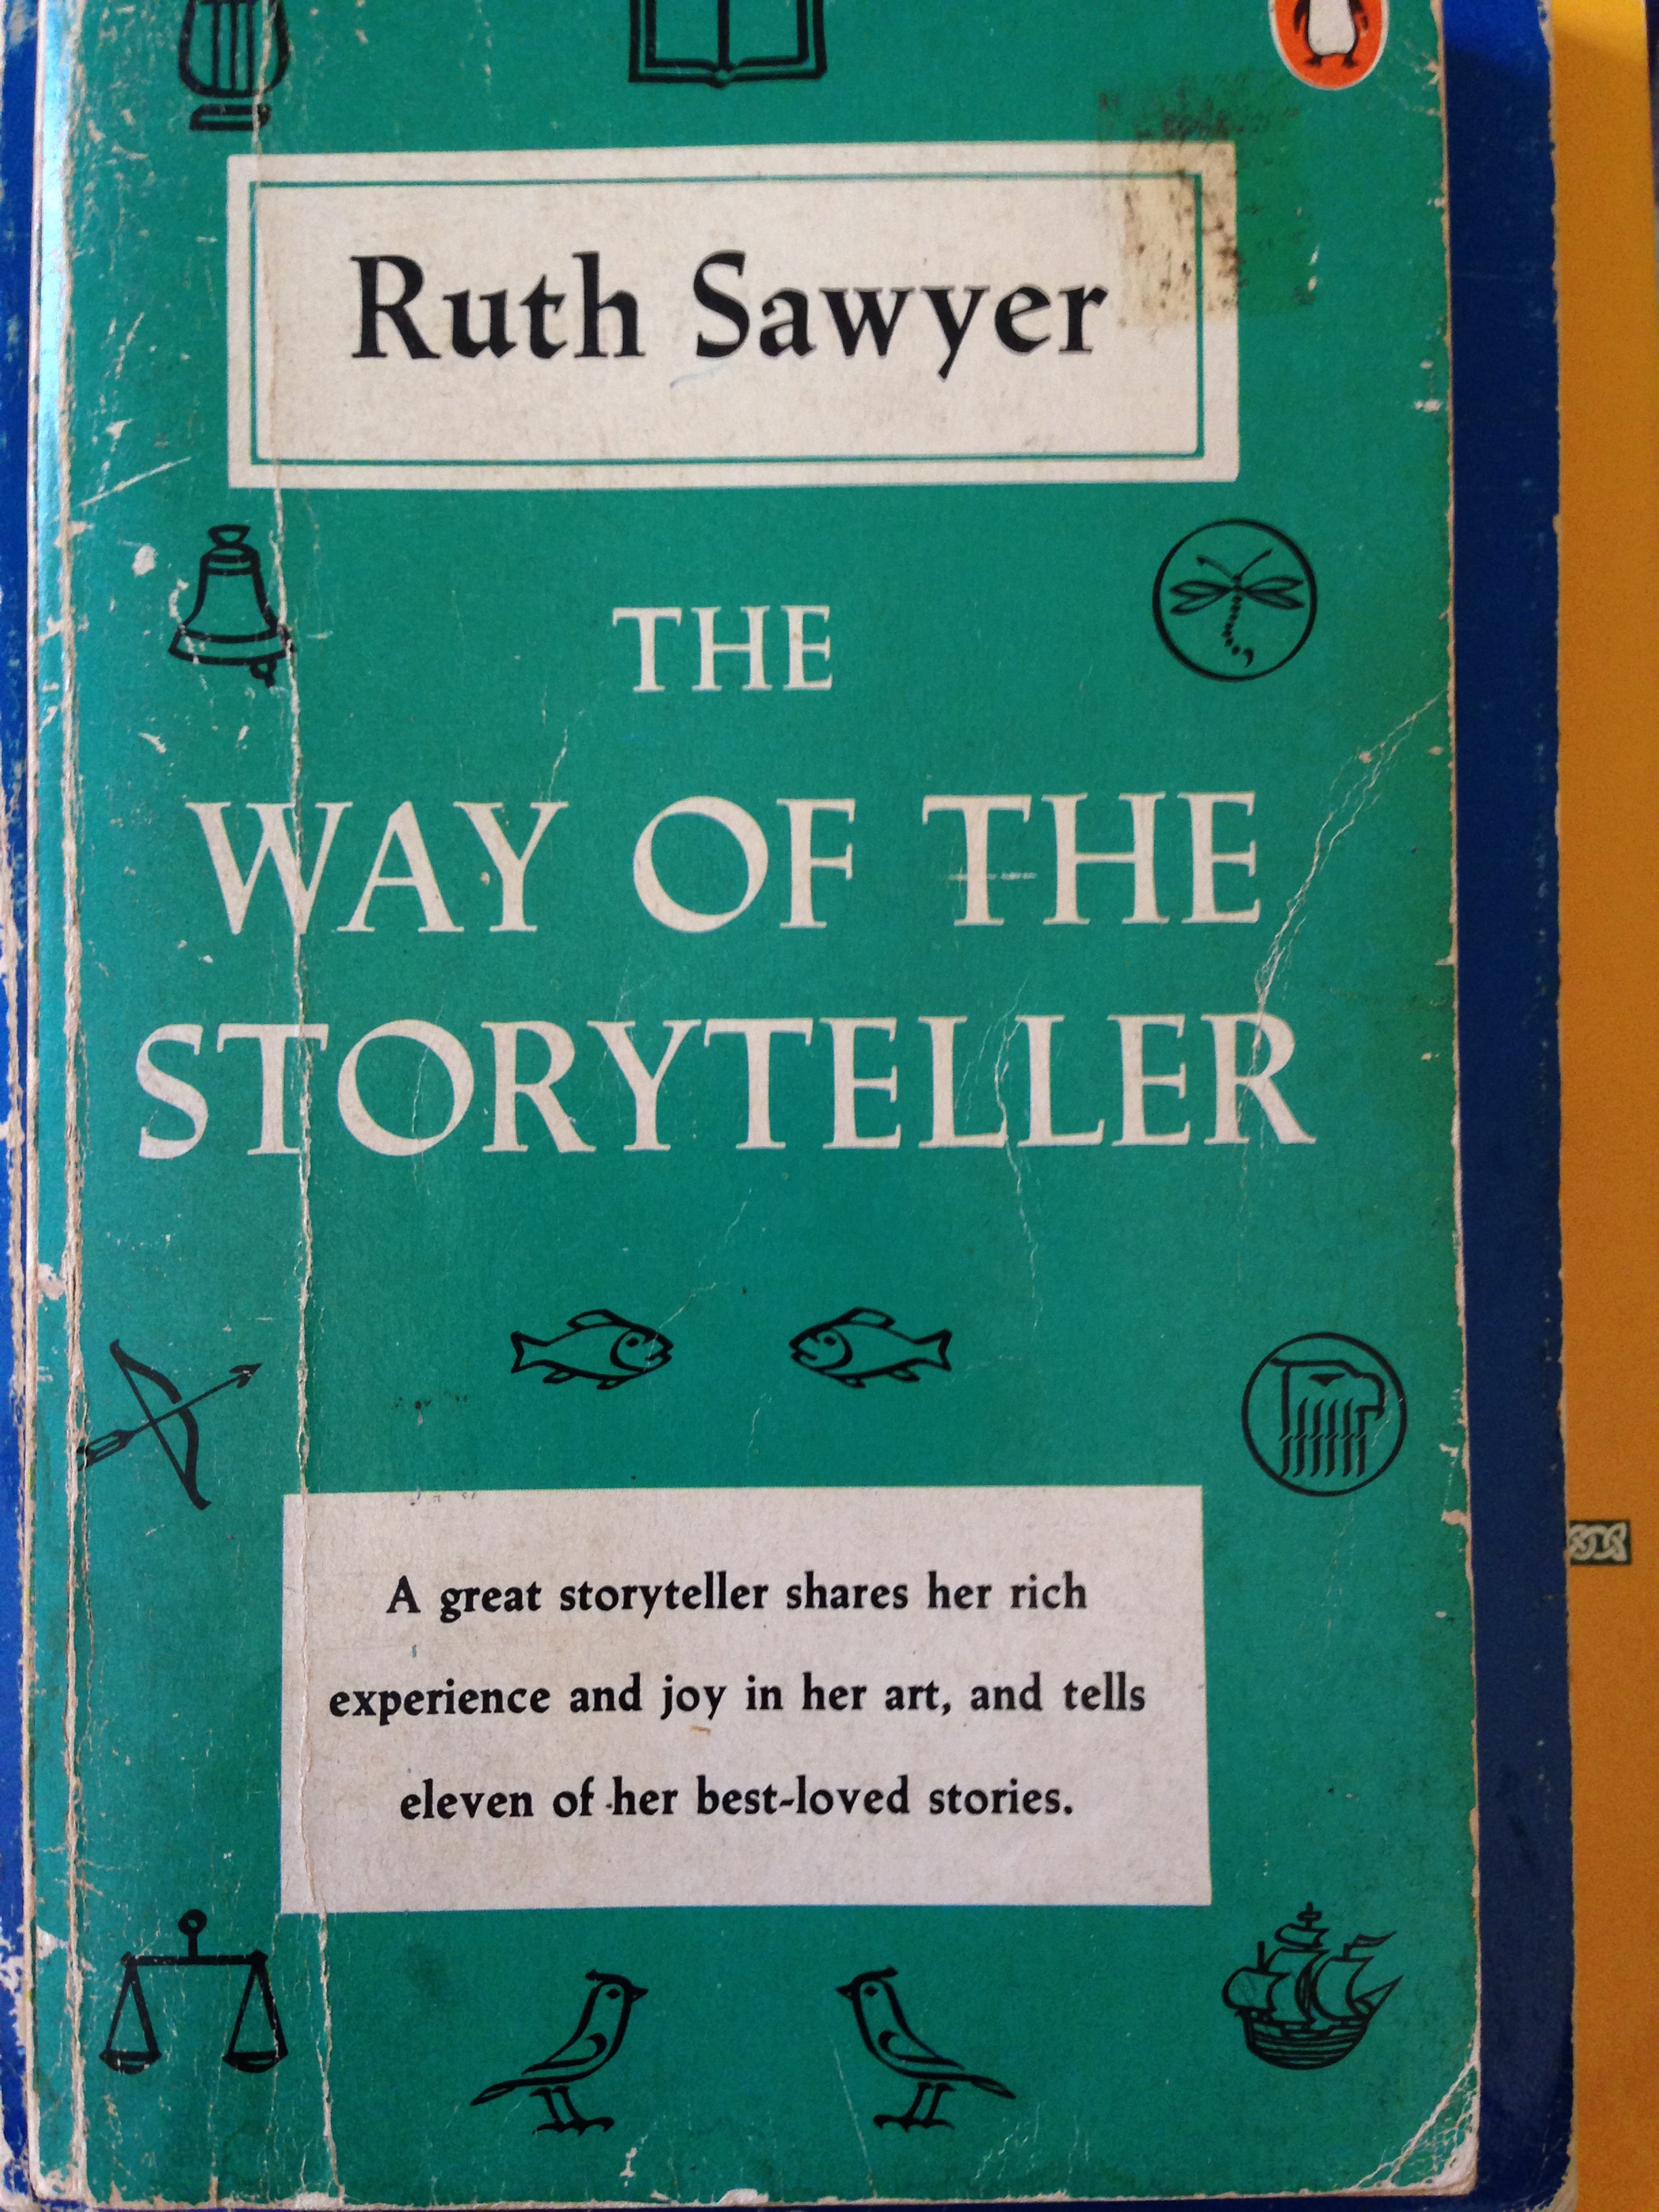 The Way of the Storyteller A Great Storyteller Shares Her Rich Experience and Joy in Her Art and Tells Eleven of Her Best-Loved Stories